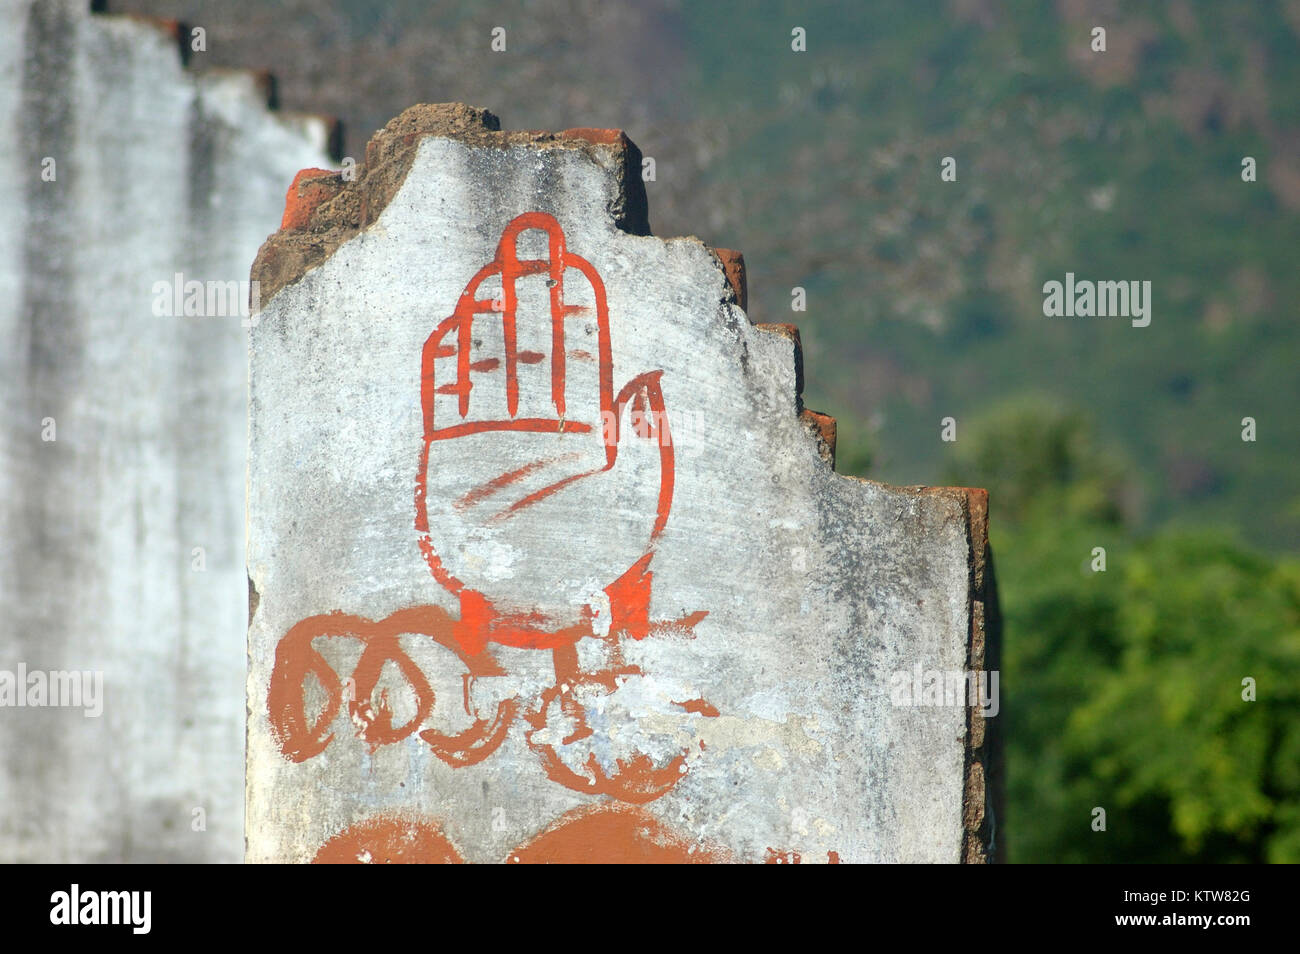 Grafitti supports the Congress Party in Tamil Nadu, India Stock Photo